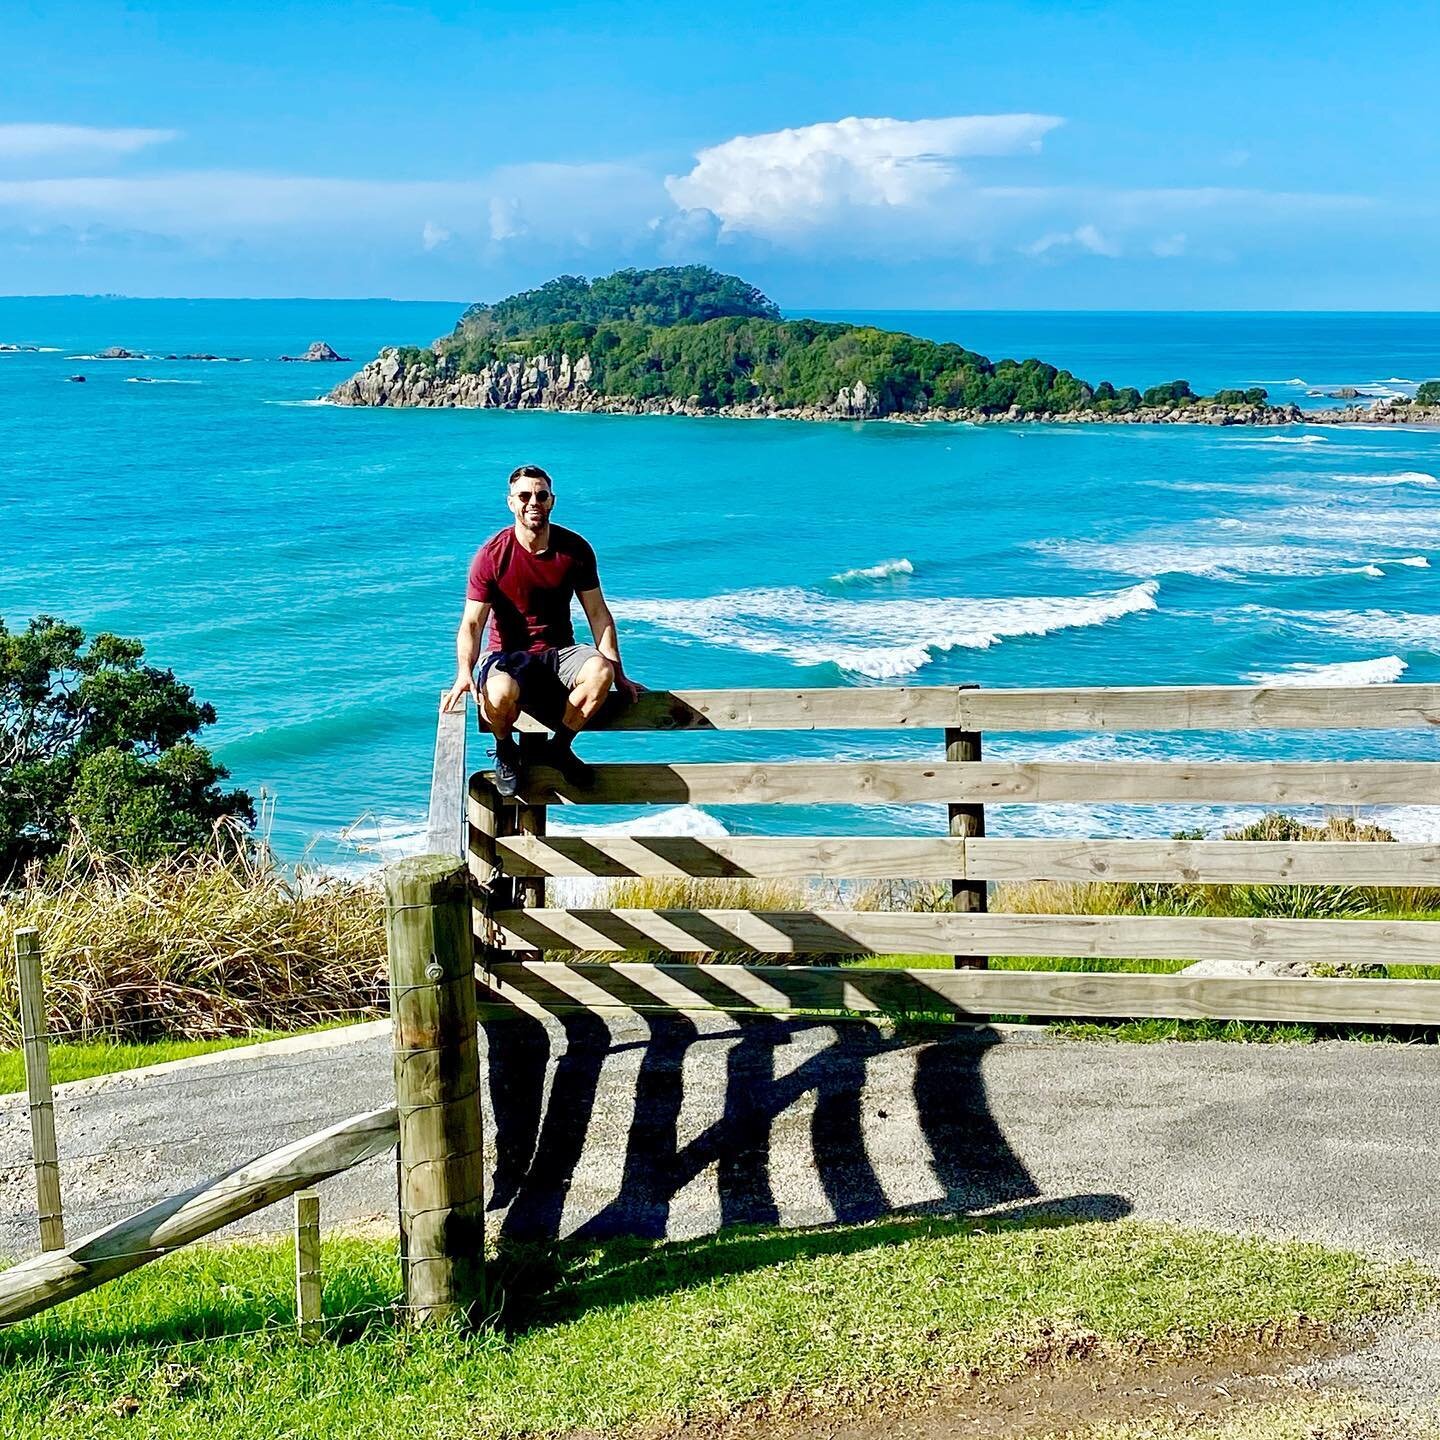 Enziddles (NZ) spam drop it was a really quick trip to see family and not get locked in from border closures (I had an escape plan if that happened 🏊&zwj;♂️ though). Great seeing all my family back home doing well and really feel for the people that